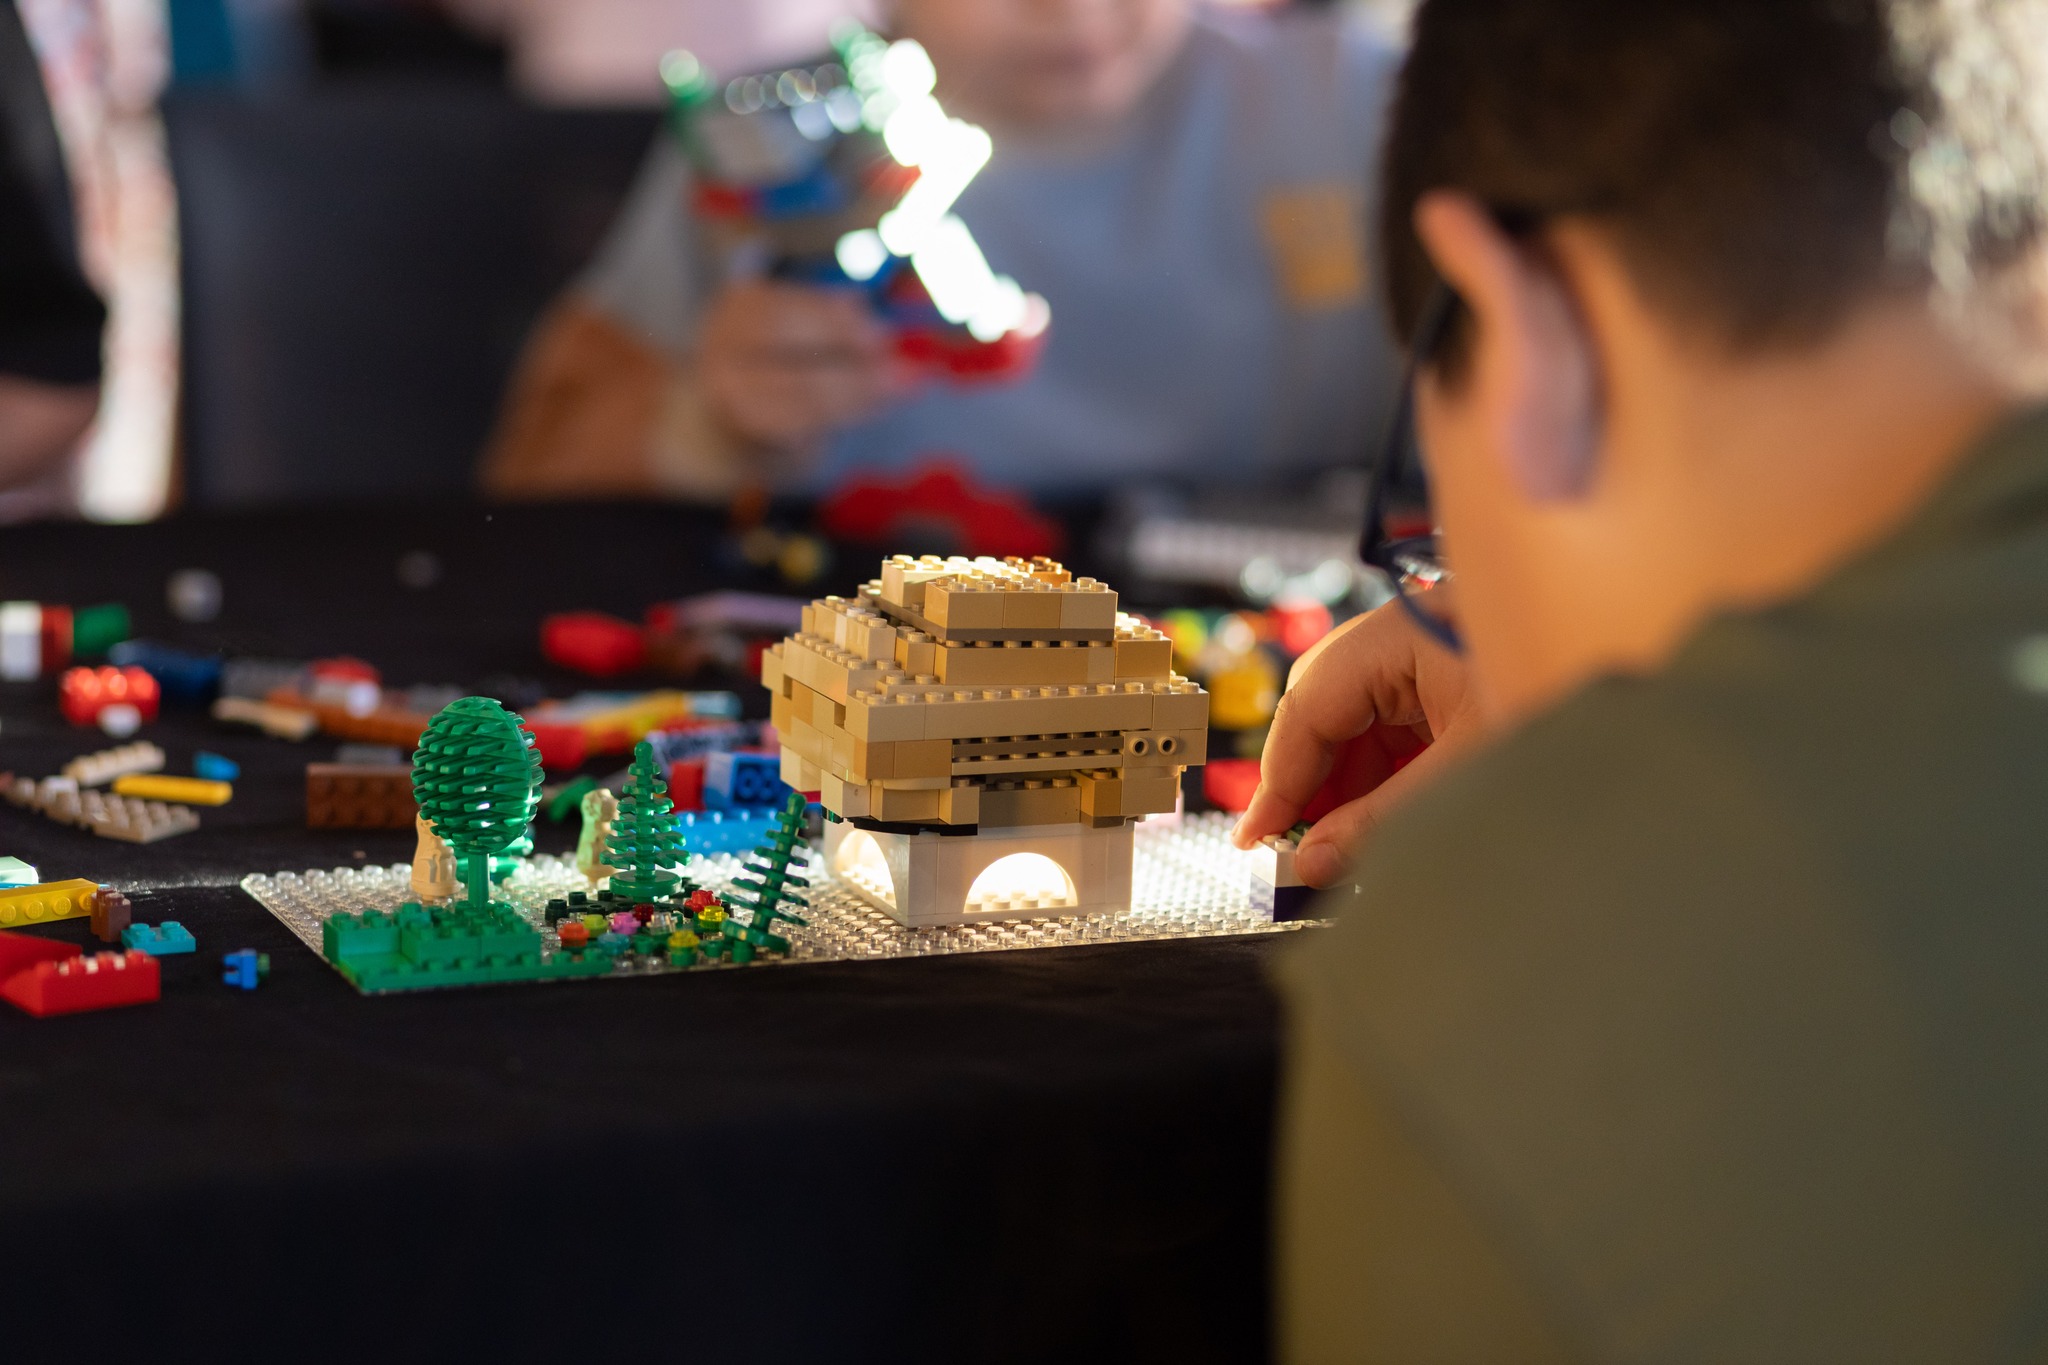 Let your students build the ECOCITIES OF TOMORROW!